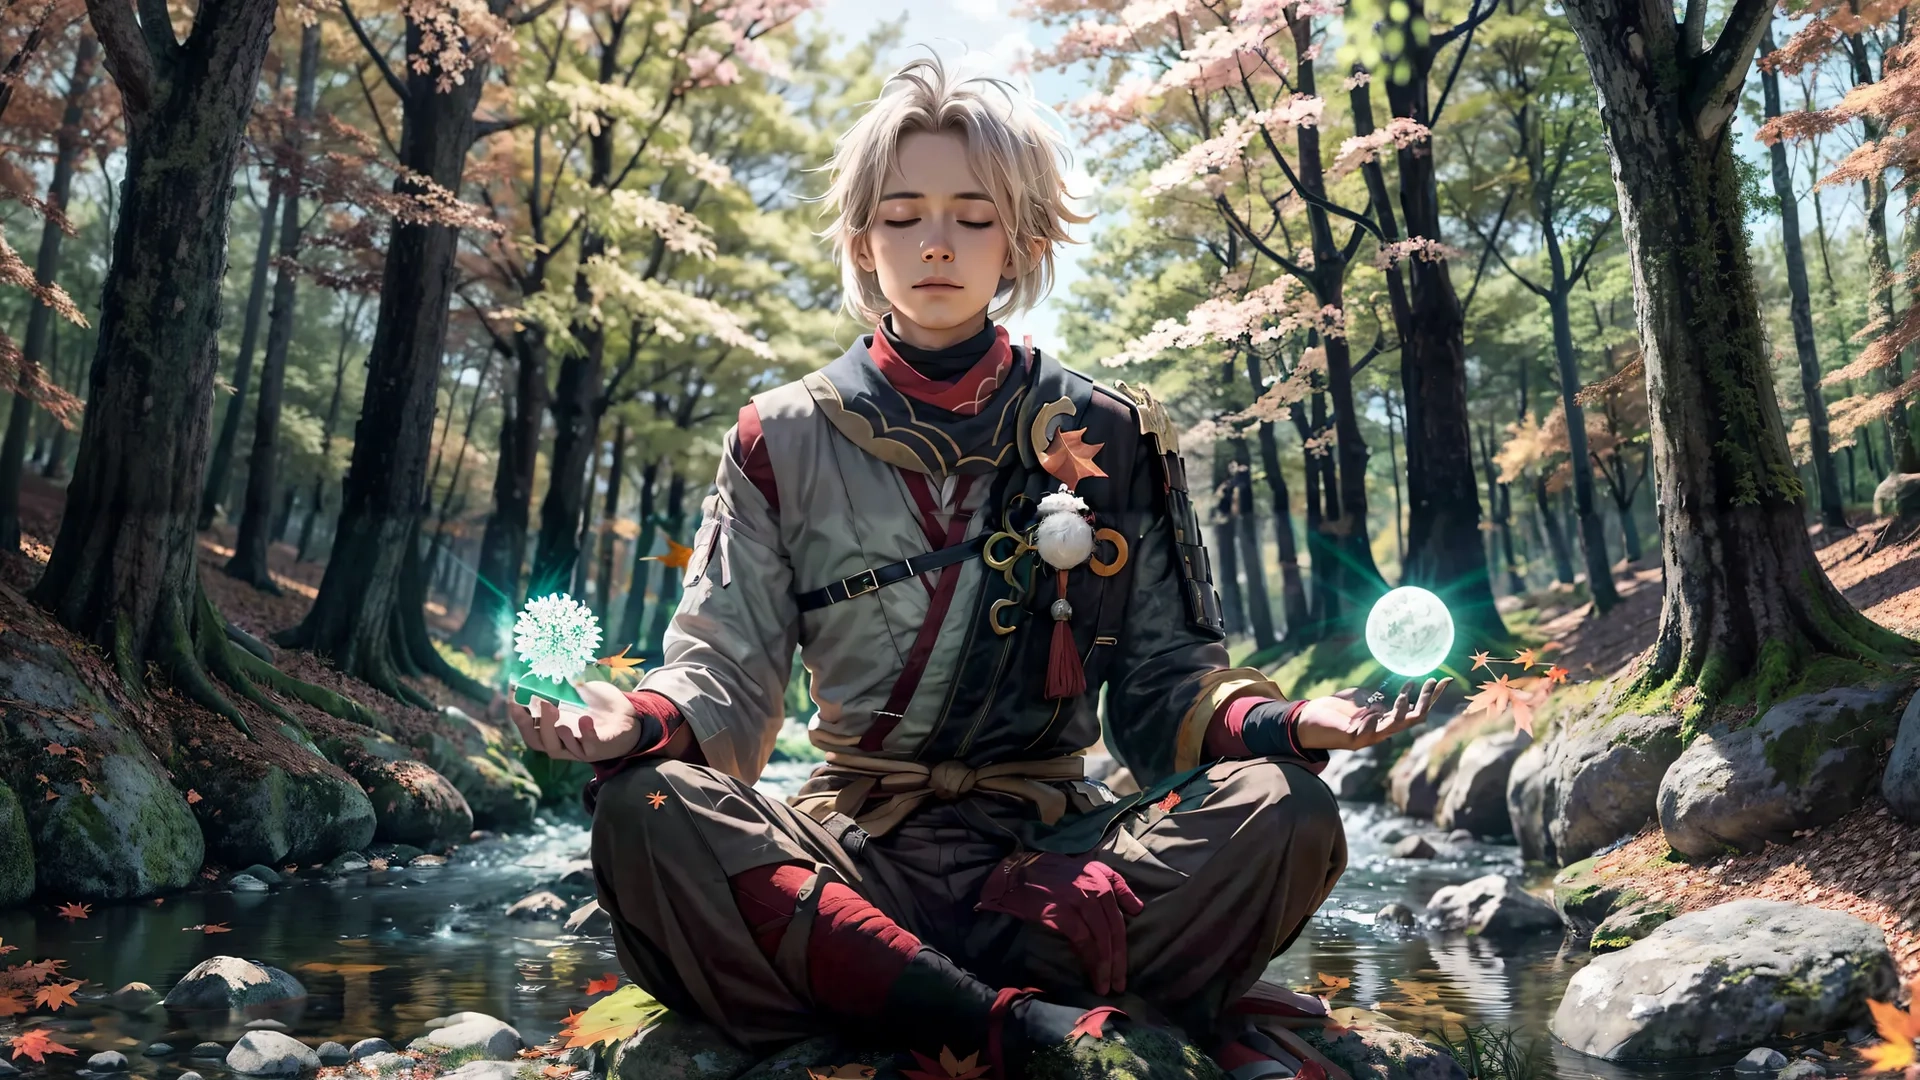 a young person sits on rocks with her eyes closed and a green bubble in their hand meditates near a stream and fall foliage
